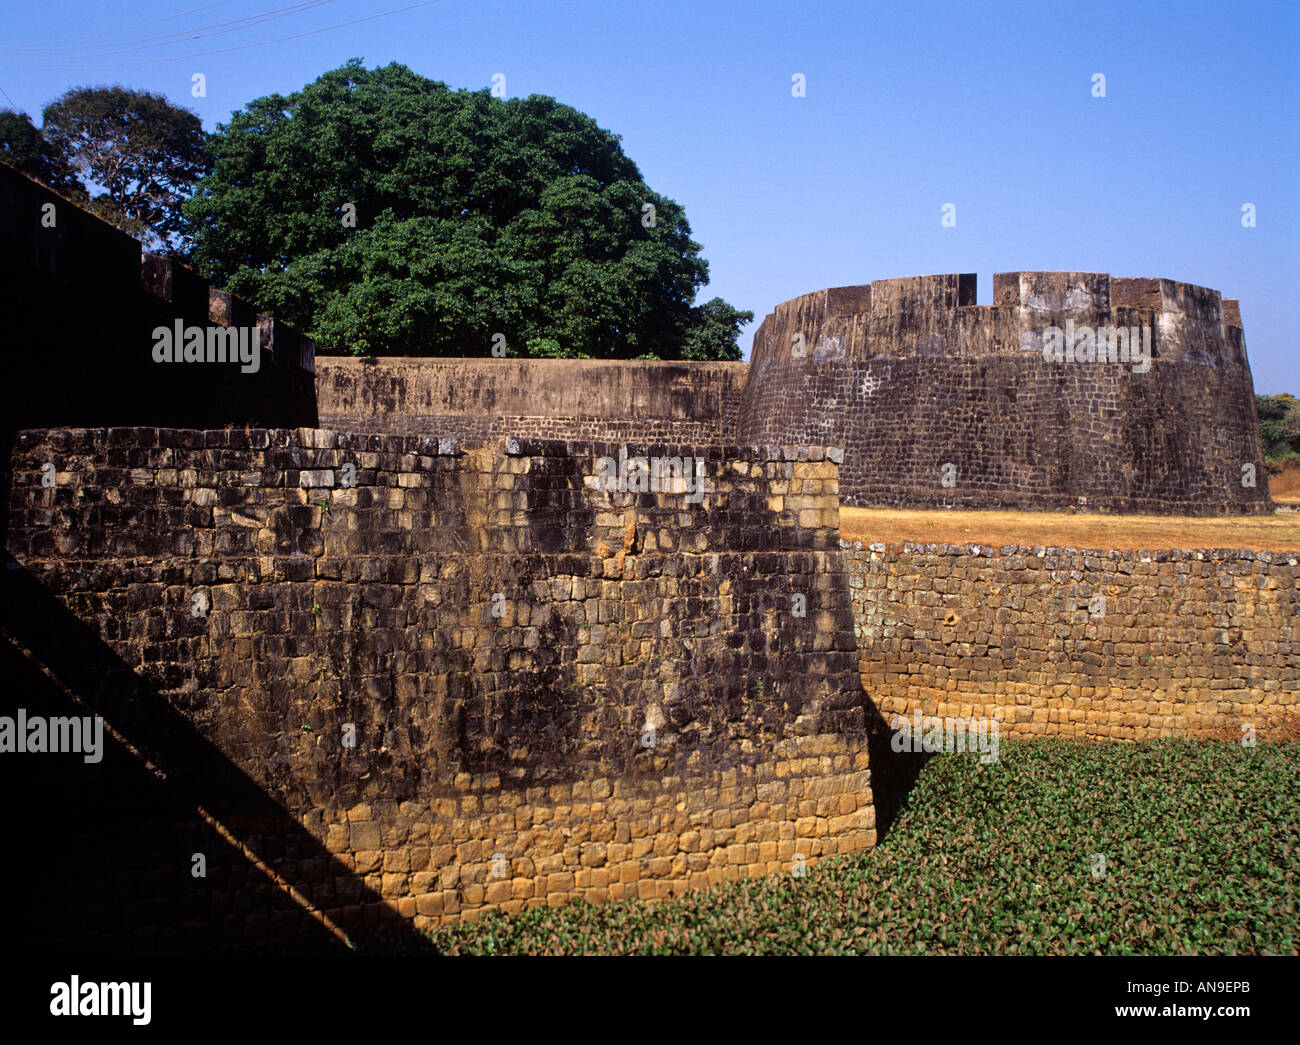 TIPPU SULTHANS FORT IN PALAKKAD KERALA Foto Stock